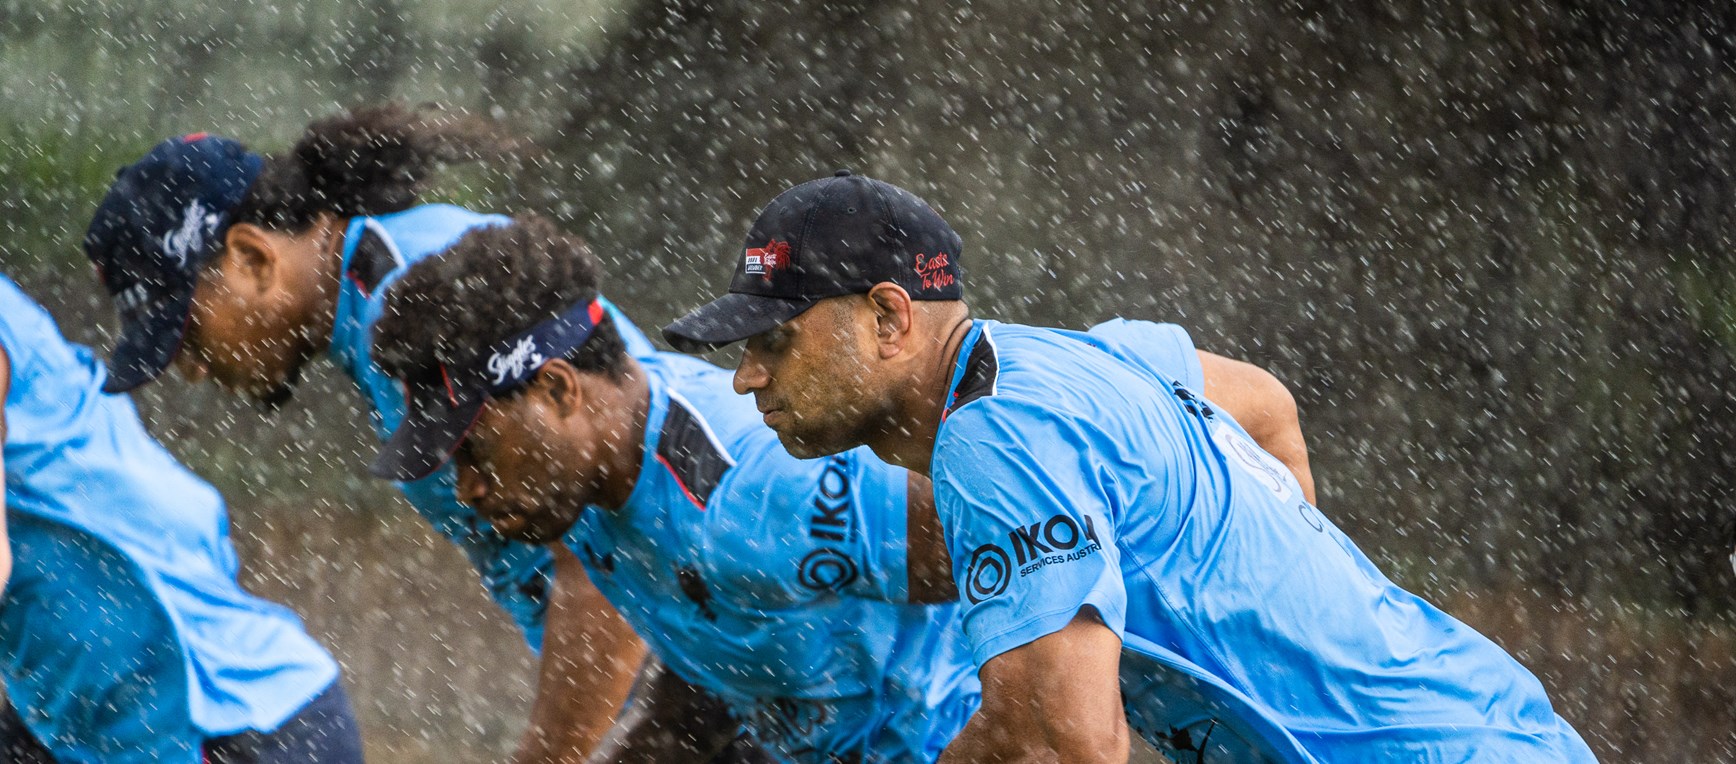 Shots | Tough Work in the Wet